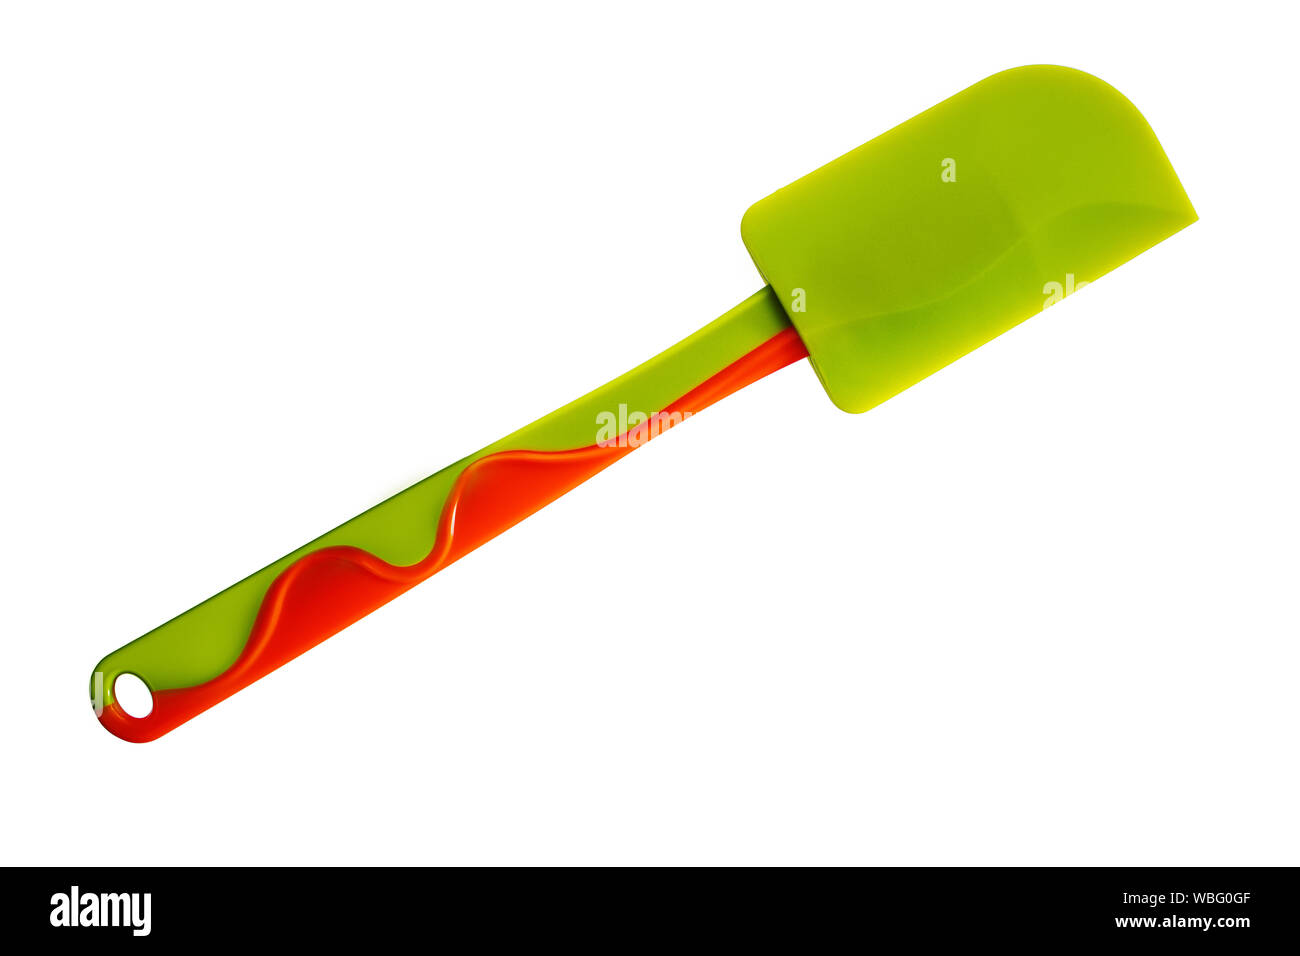 Kitchen utensils, home kitchen tools, mint rubber accessories on dark  background. Restaurant, cooking, culinary, kitchen theme. Silicone spatulas  and brushes, free space for text Stock Photo by ©Magryt_Artur 441739004